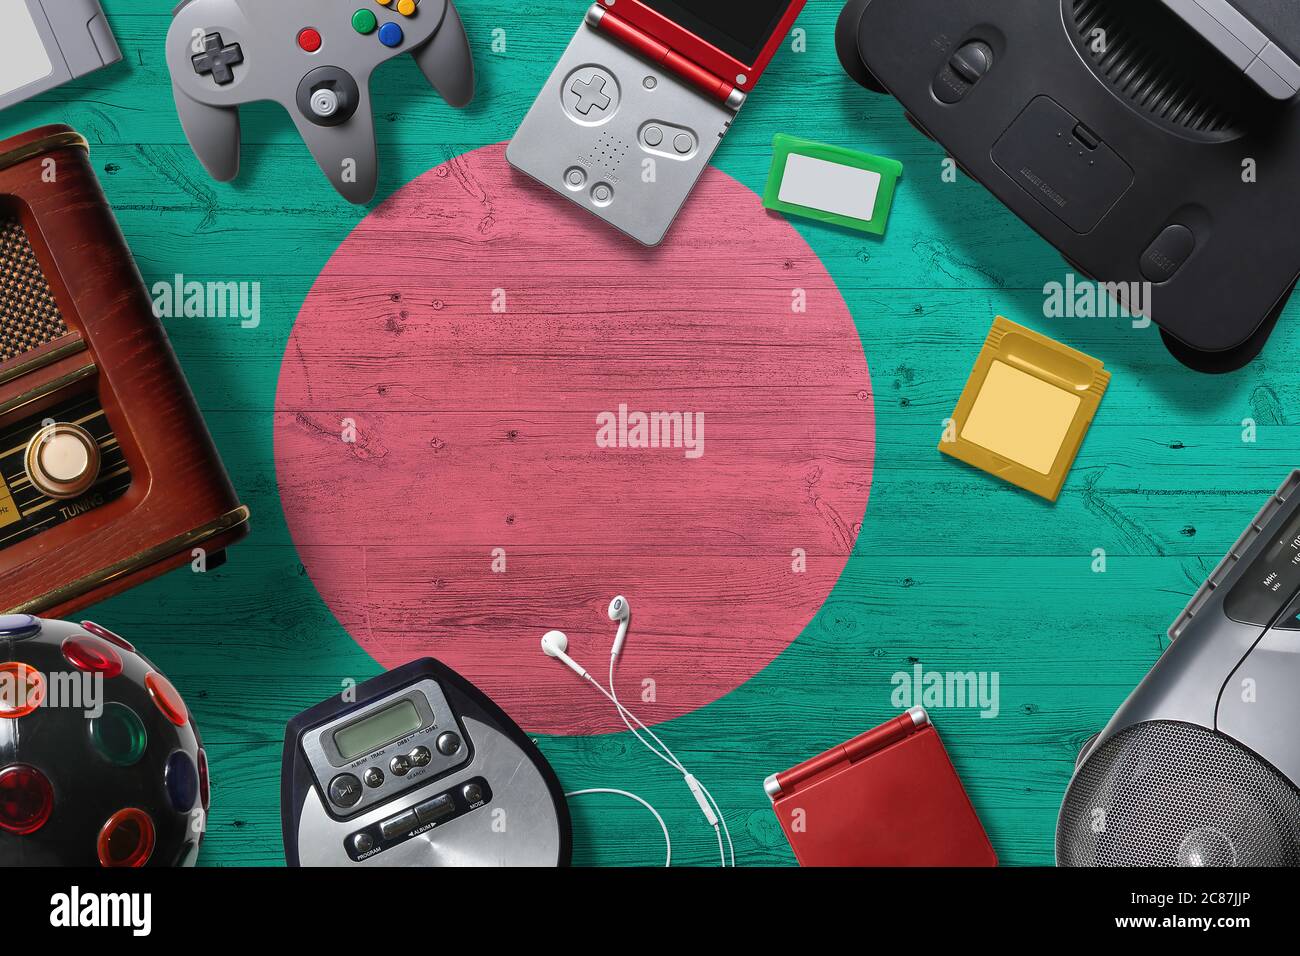 Bangladesh retro gaming concept. A collection of retro video game controllers shot from above on a national background. Stock Photo